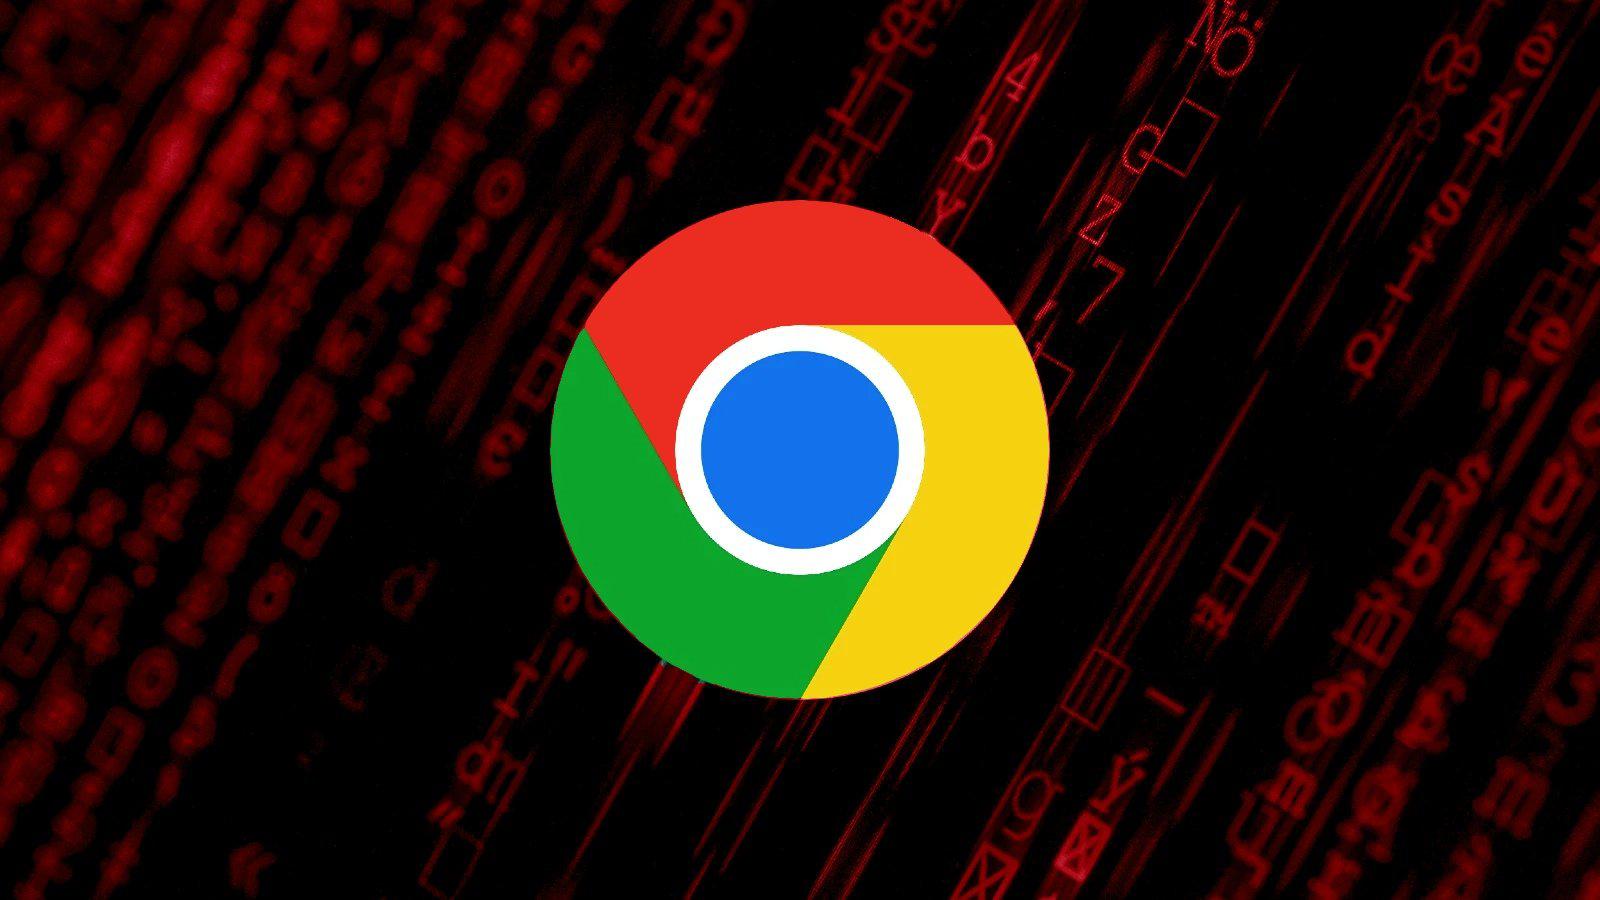 New Chrome feature aims to stop hackers from using stolen cookies